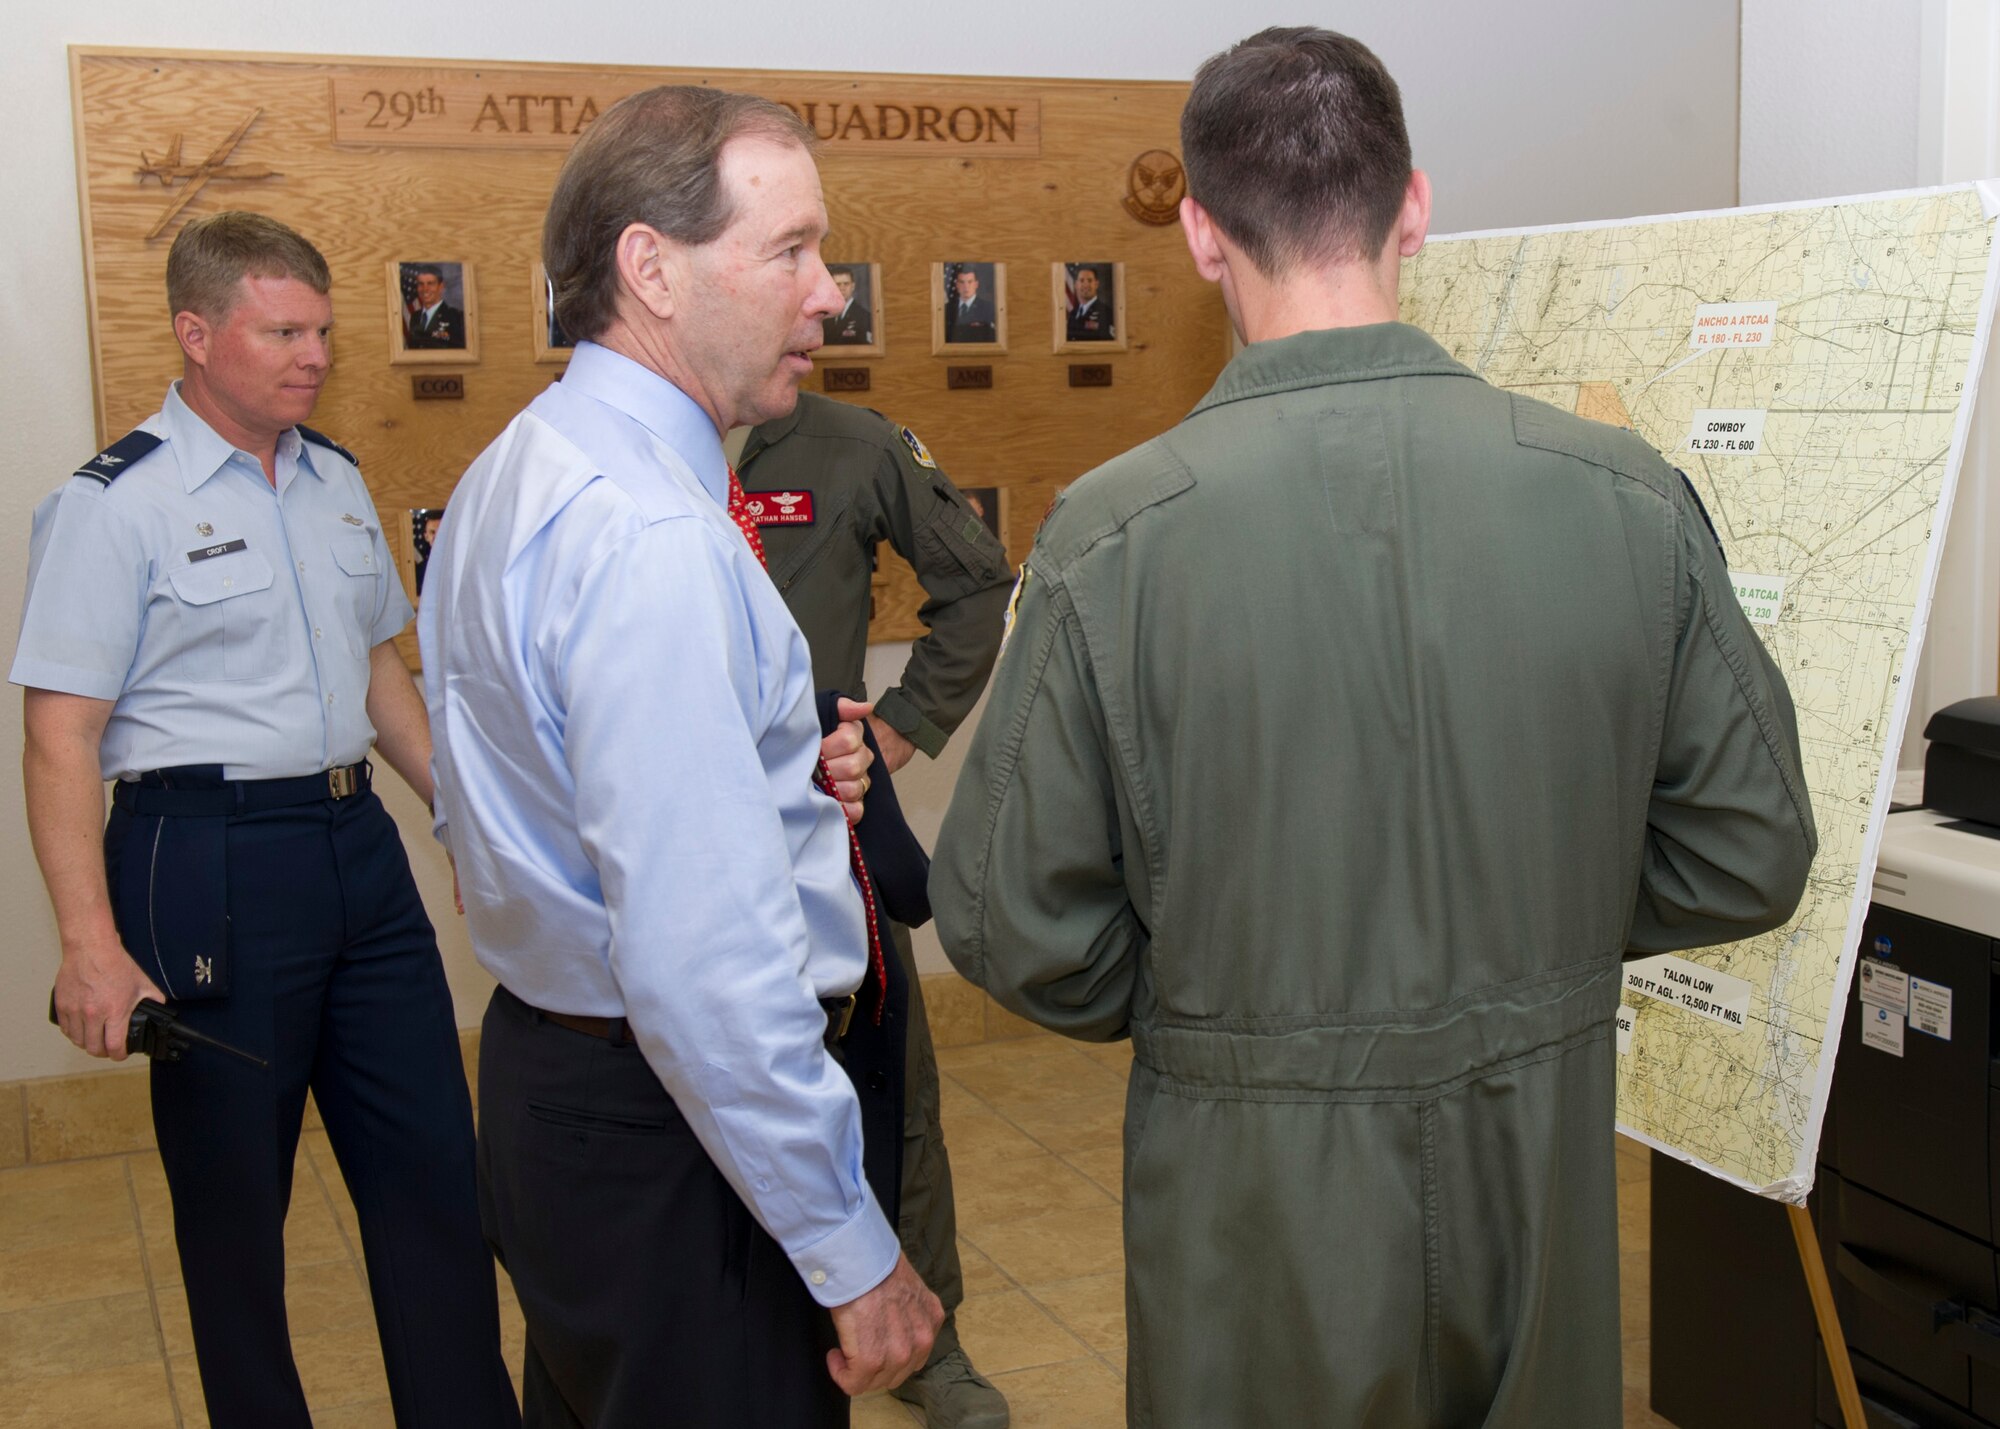 Senator Tom Udall of New Mexico receives a briefing on the New Mexico airspace from Maj. Daniel George, a remotely piloted aircraft pilot from the 29th Attack Squadron at Holloman Air Force Base, N.M., April 29. Udall was informed of current RPA flight restrictions and how the available airspace plays a part in that. (U.S. Air Force photo by Senior Airman DeAndre Curtiss/Released)